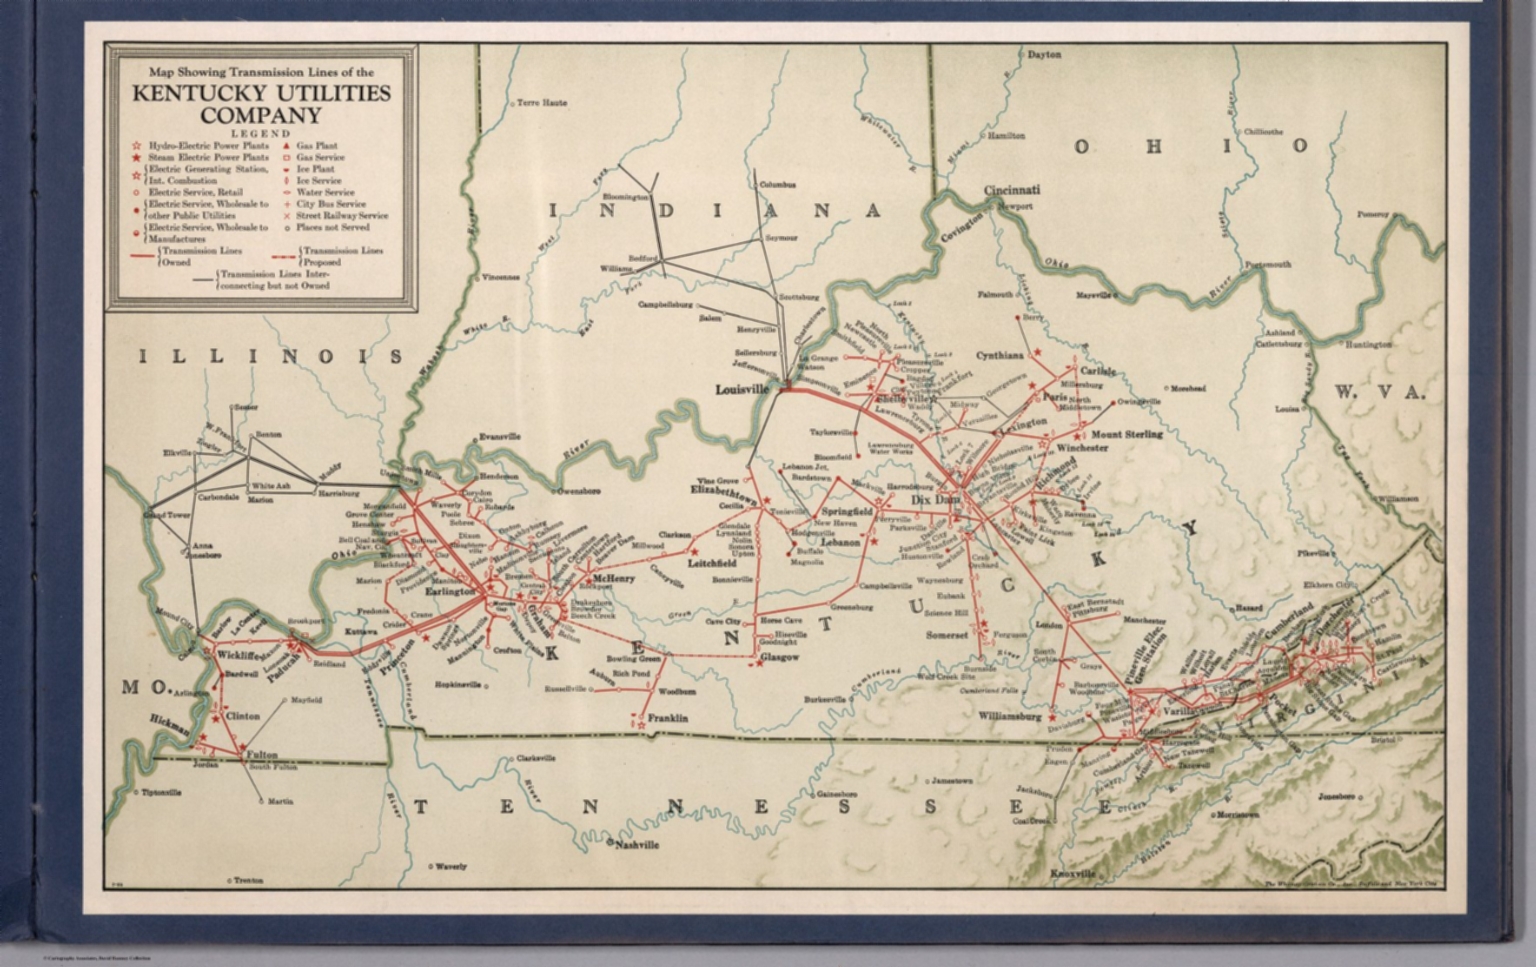 map-showing-transmission-lines-of-the-kentucky-utilities-company